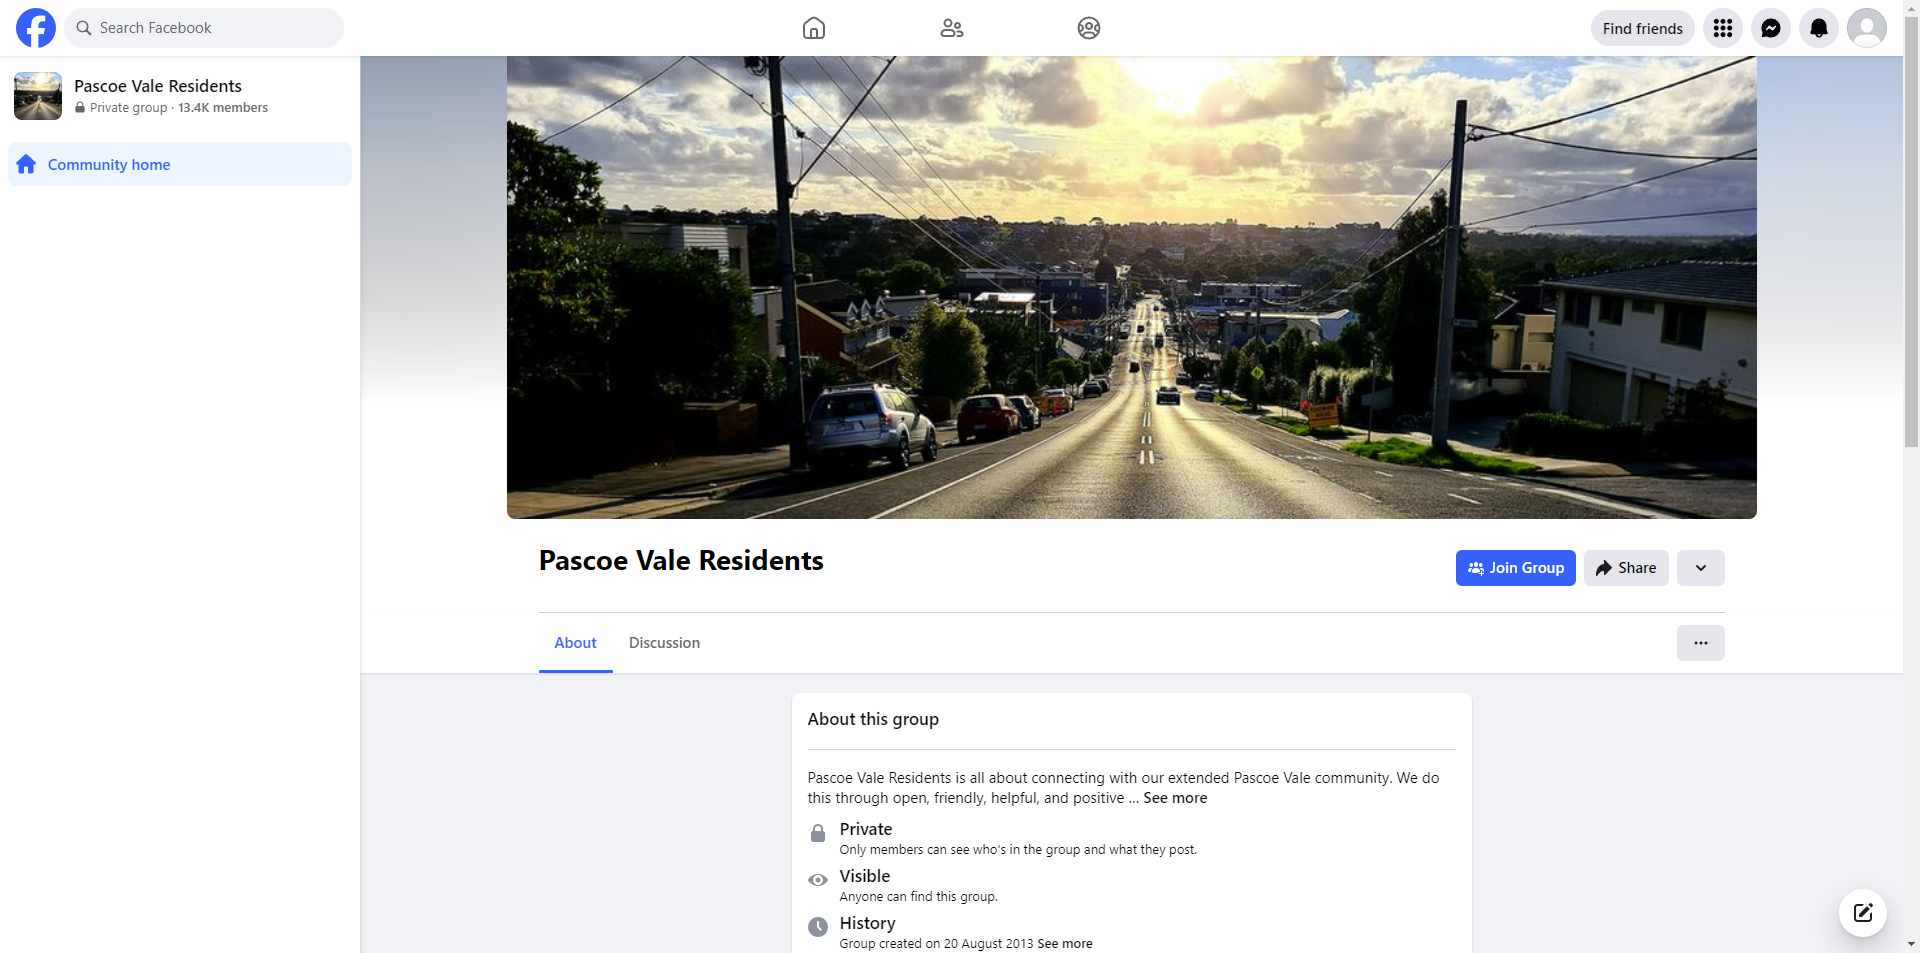 Pascoe Vale Residents